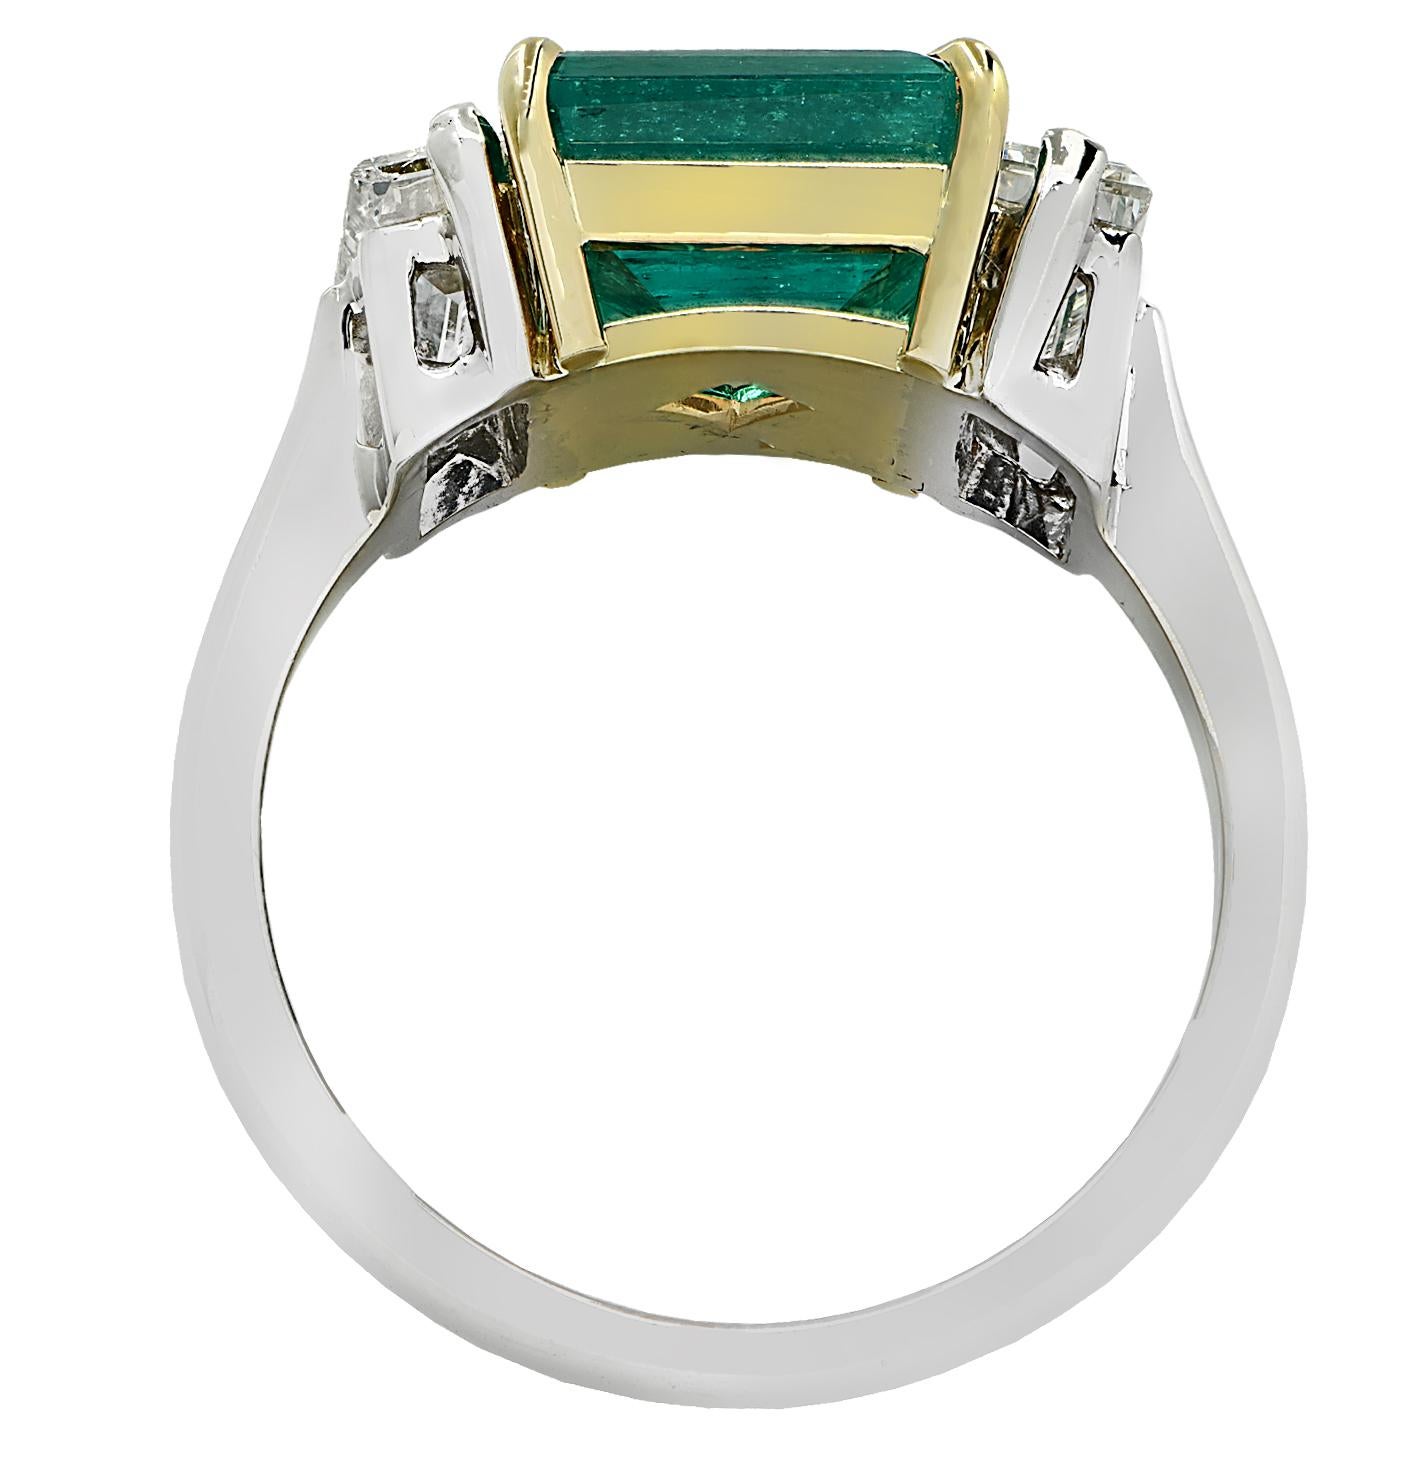 A spectacular creation from the house of Vivid Diamonds, this ring is crafted by hand in 18 karat yellow and white gold showcasing an AGL certified, bright green emerald weighing 2.67 carats total with modern minor treatment. The emerald is an